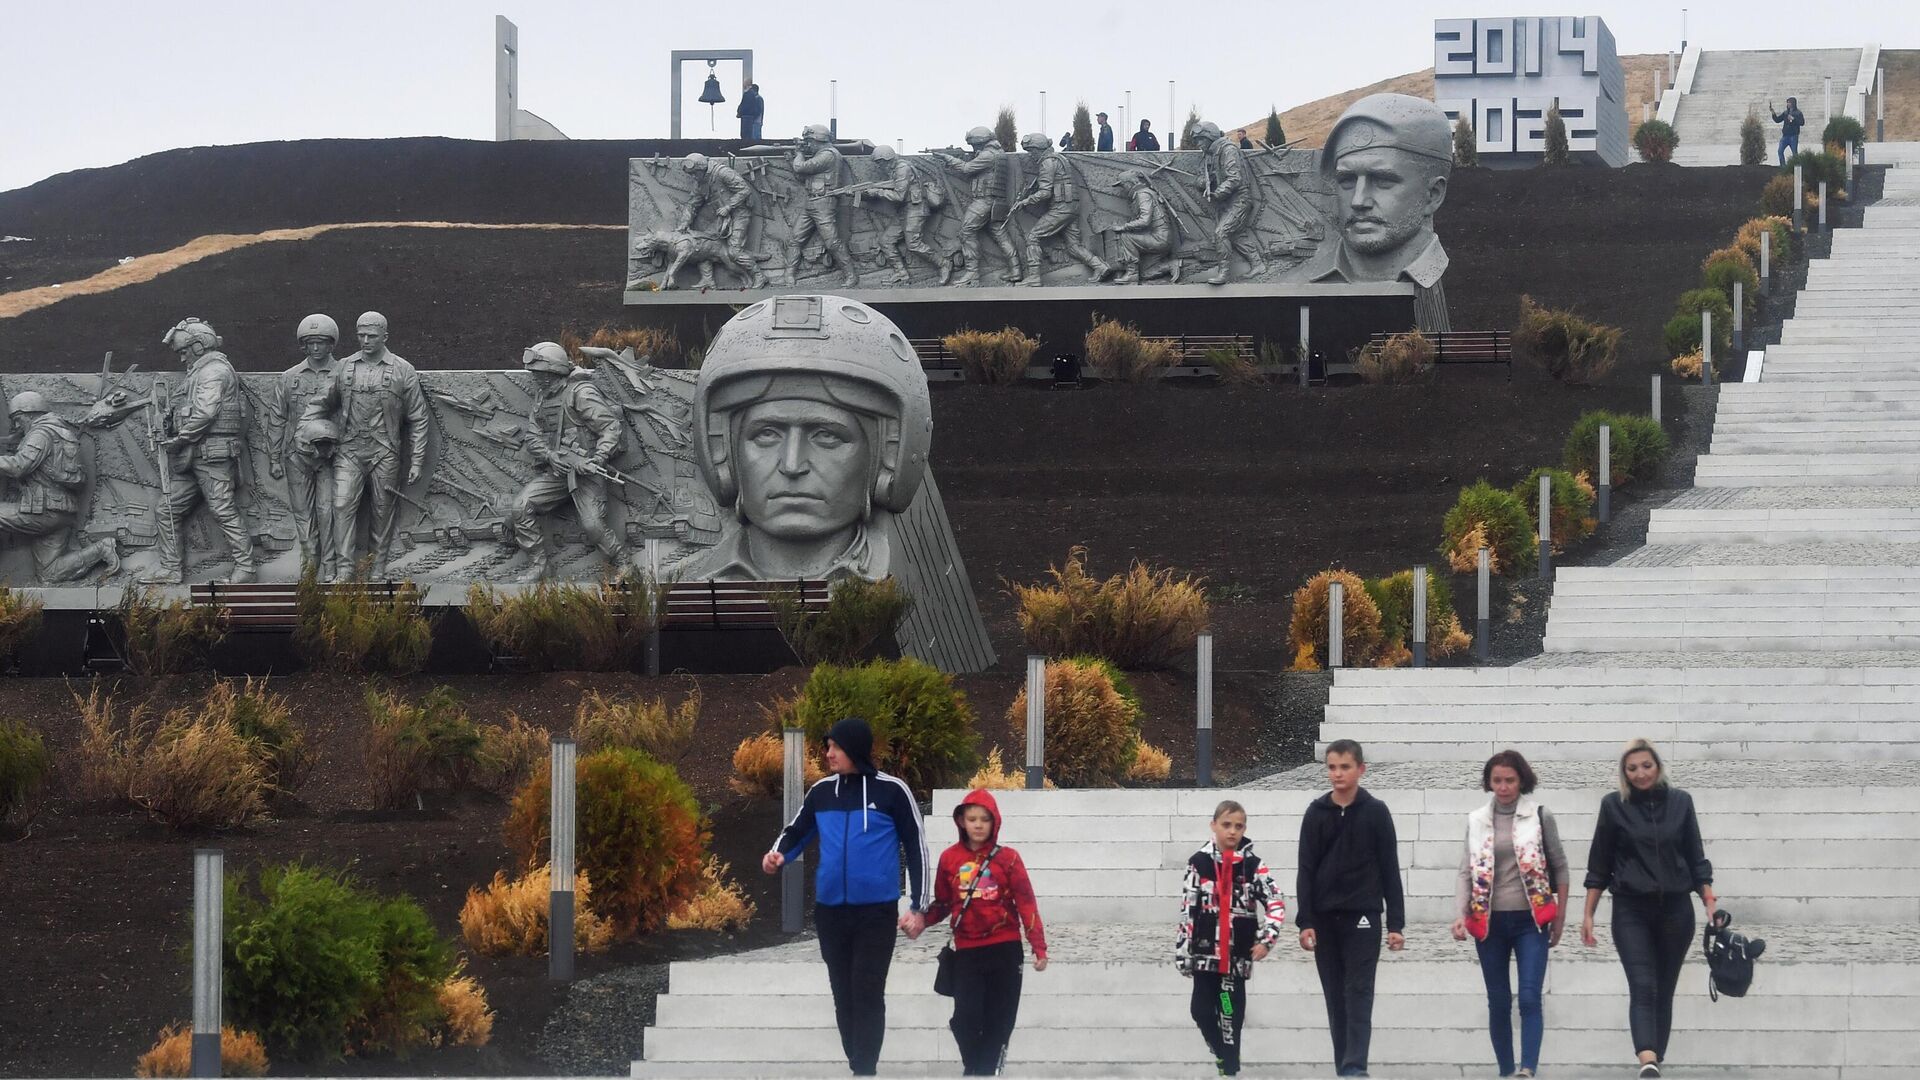 People walk down the stairs at the Savur-Mogyla war memorial complex with a bas-relief of Vladimir Zhoga, leader of the Sparta Battalion rebel military group in the Donetsk People's Republic (DPR), seen in the background, as Russia's military operation in Ukraine continues, near the city of  Snezhnoe, Donetsk People's Republic - Sputnik International, 1920, 20.09.2022